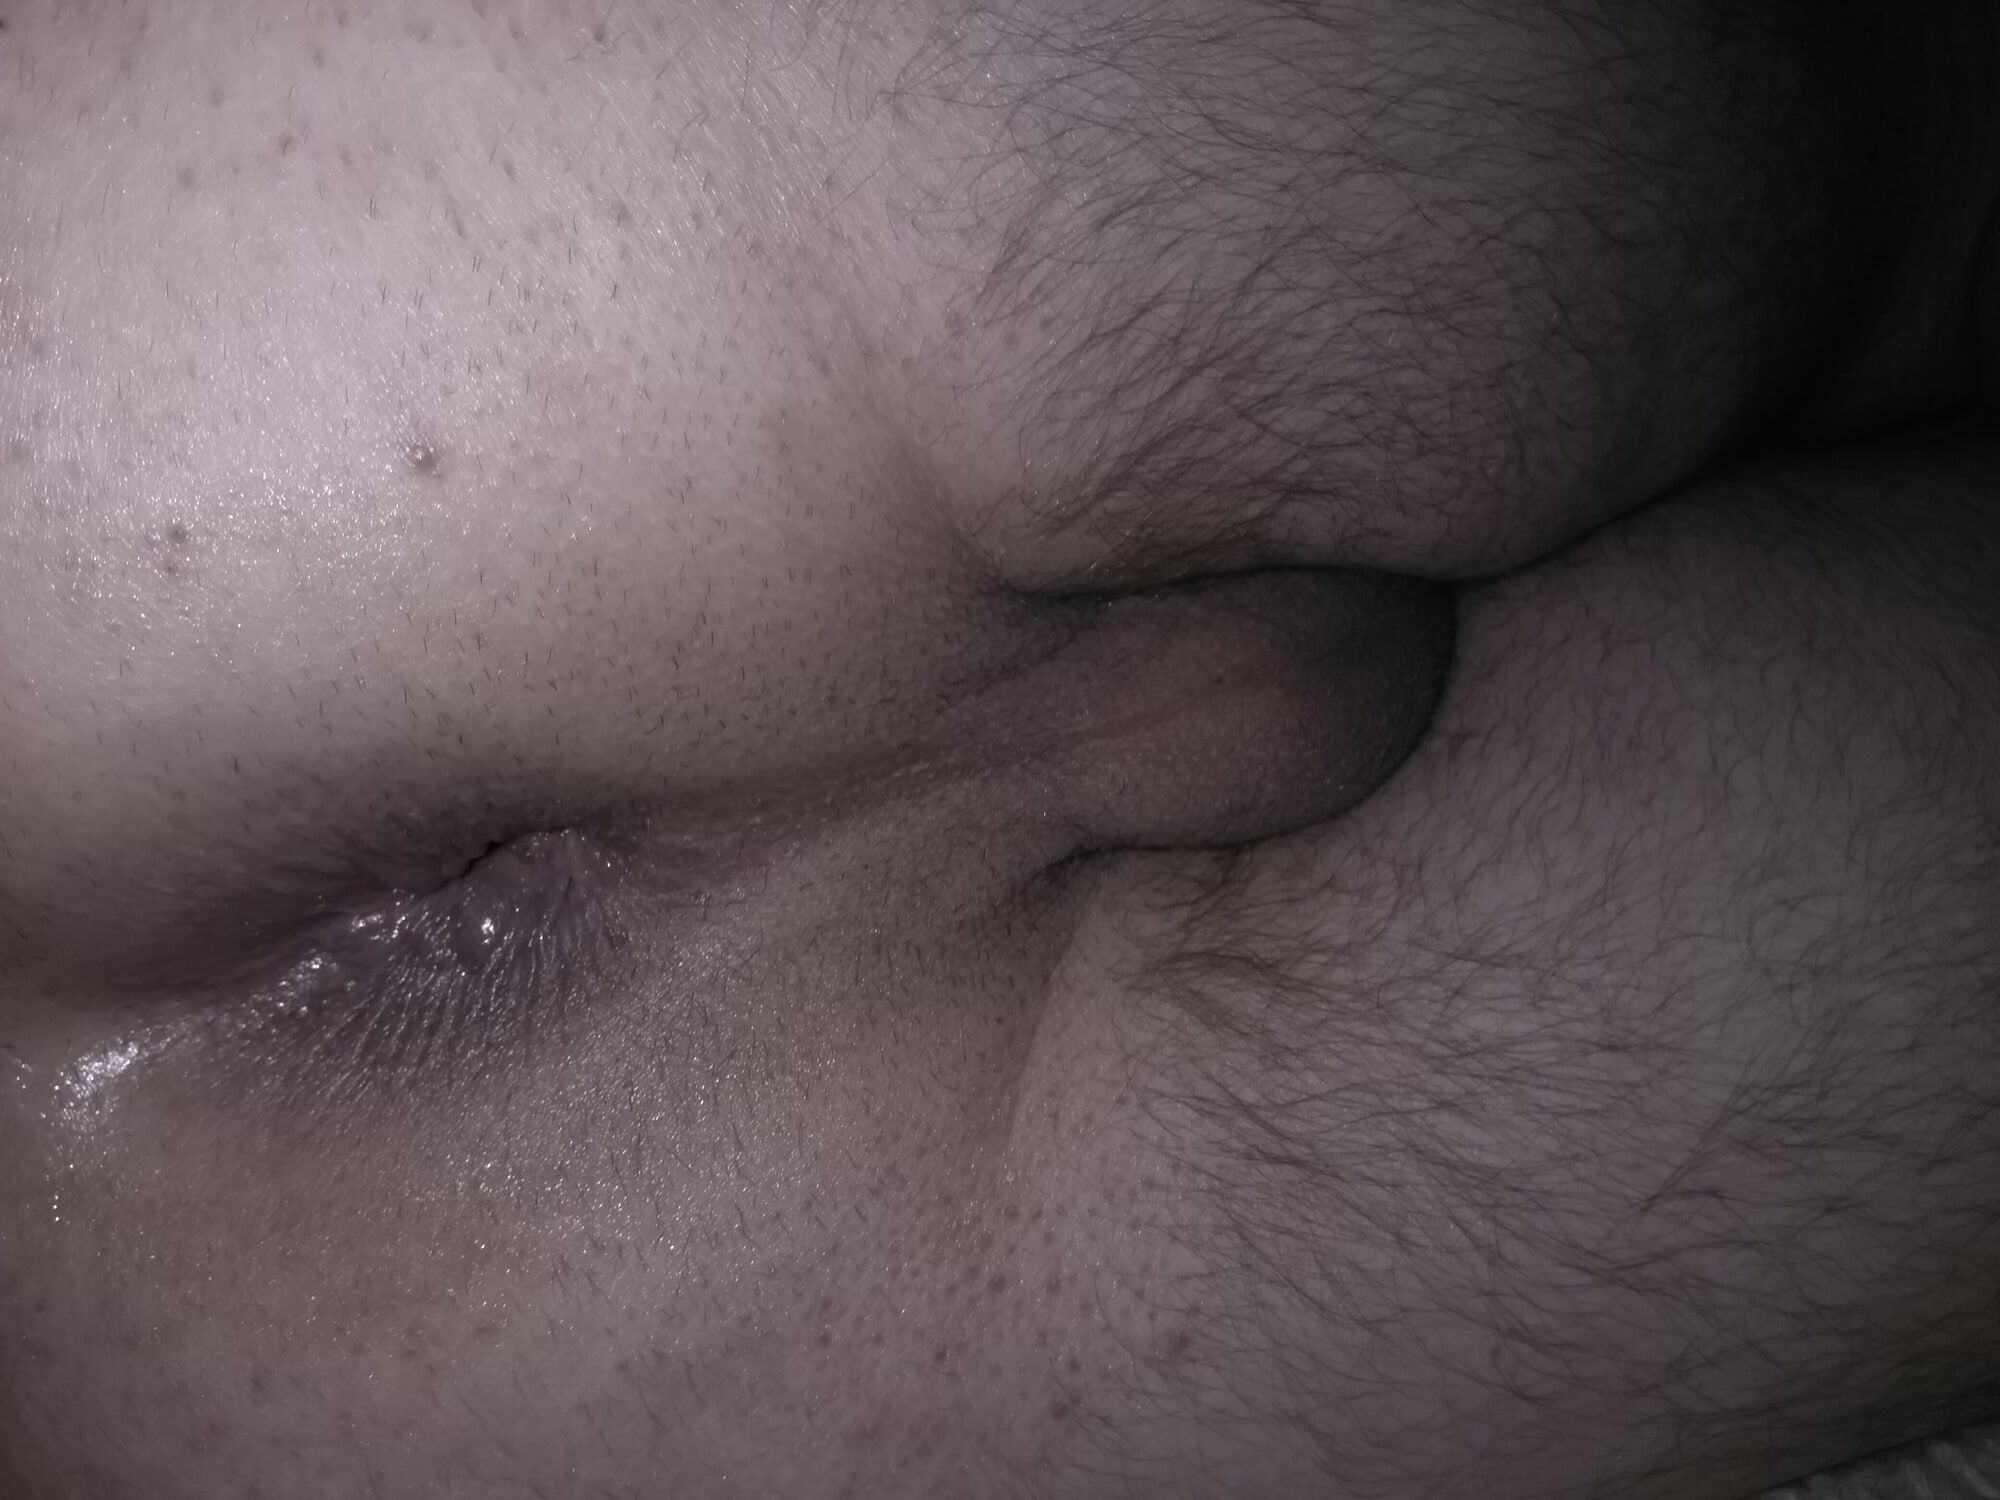 After dildo action #6